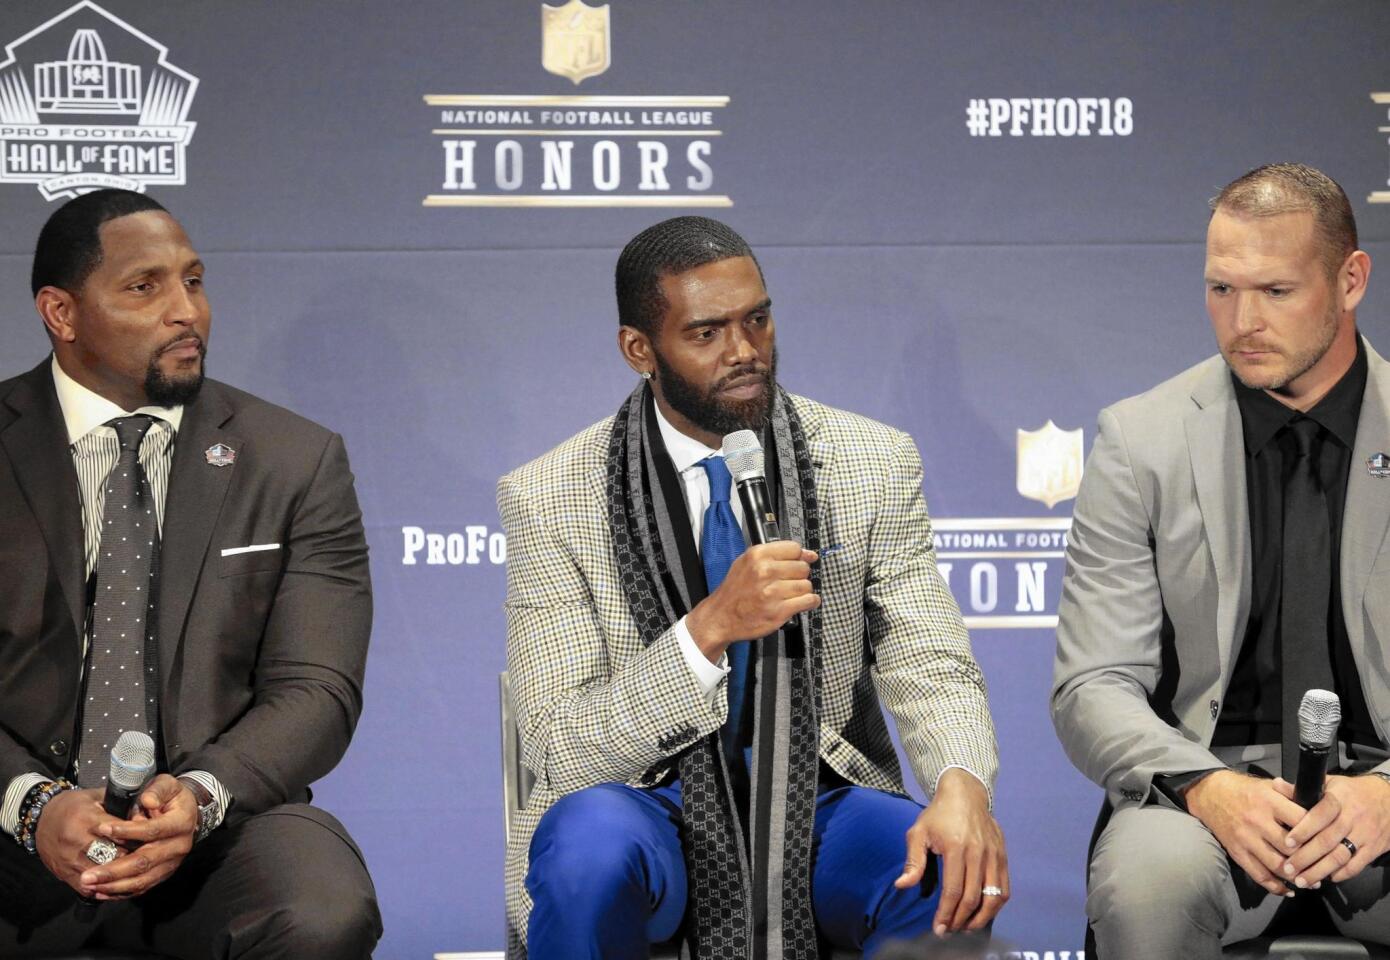 Former NFL players Ray Lewis, from left, Randy Moss and Brian Urlacher are among the inductees who will be inducted in August into the Pro Football Hall of Fame.